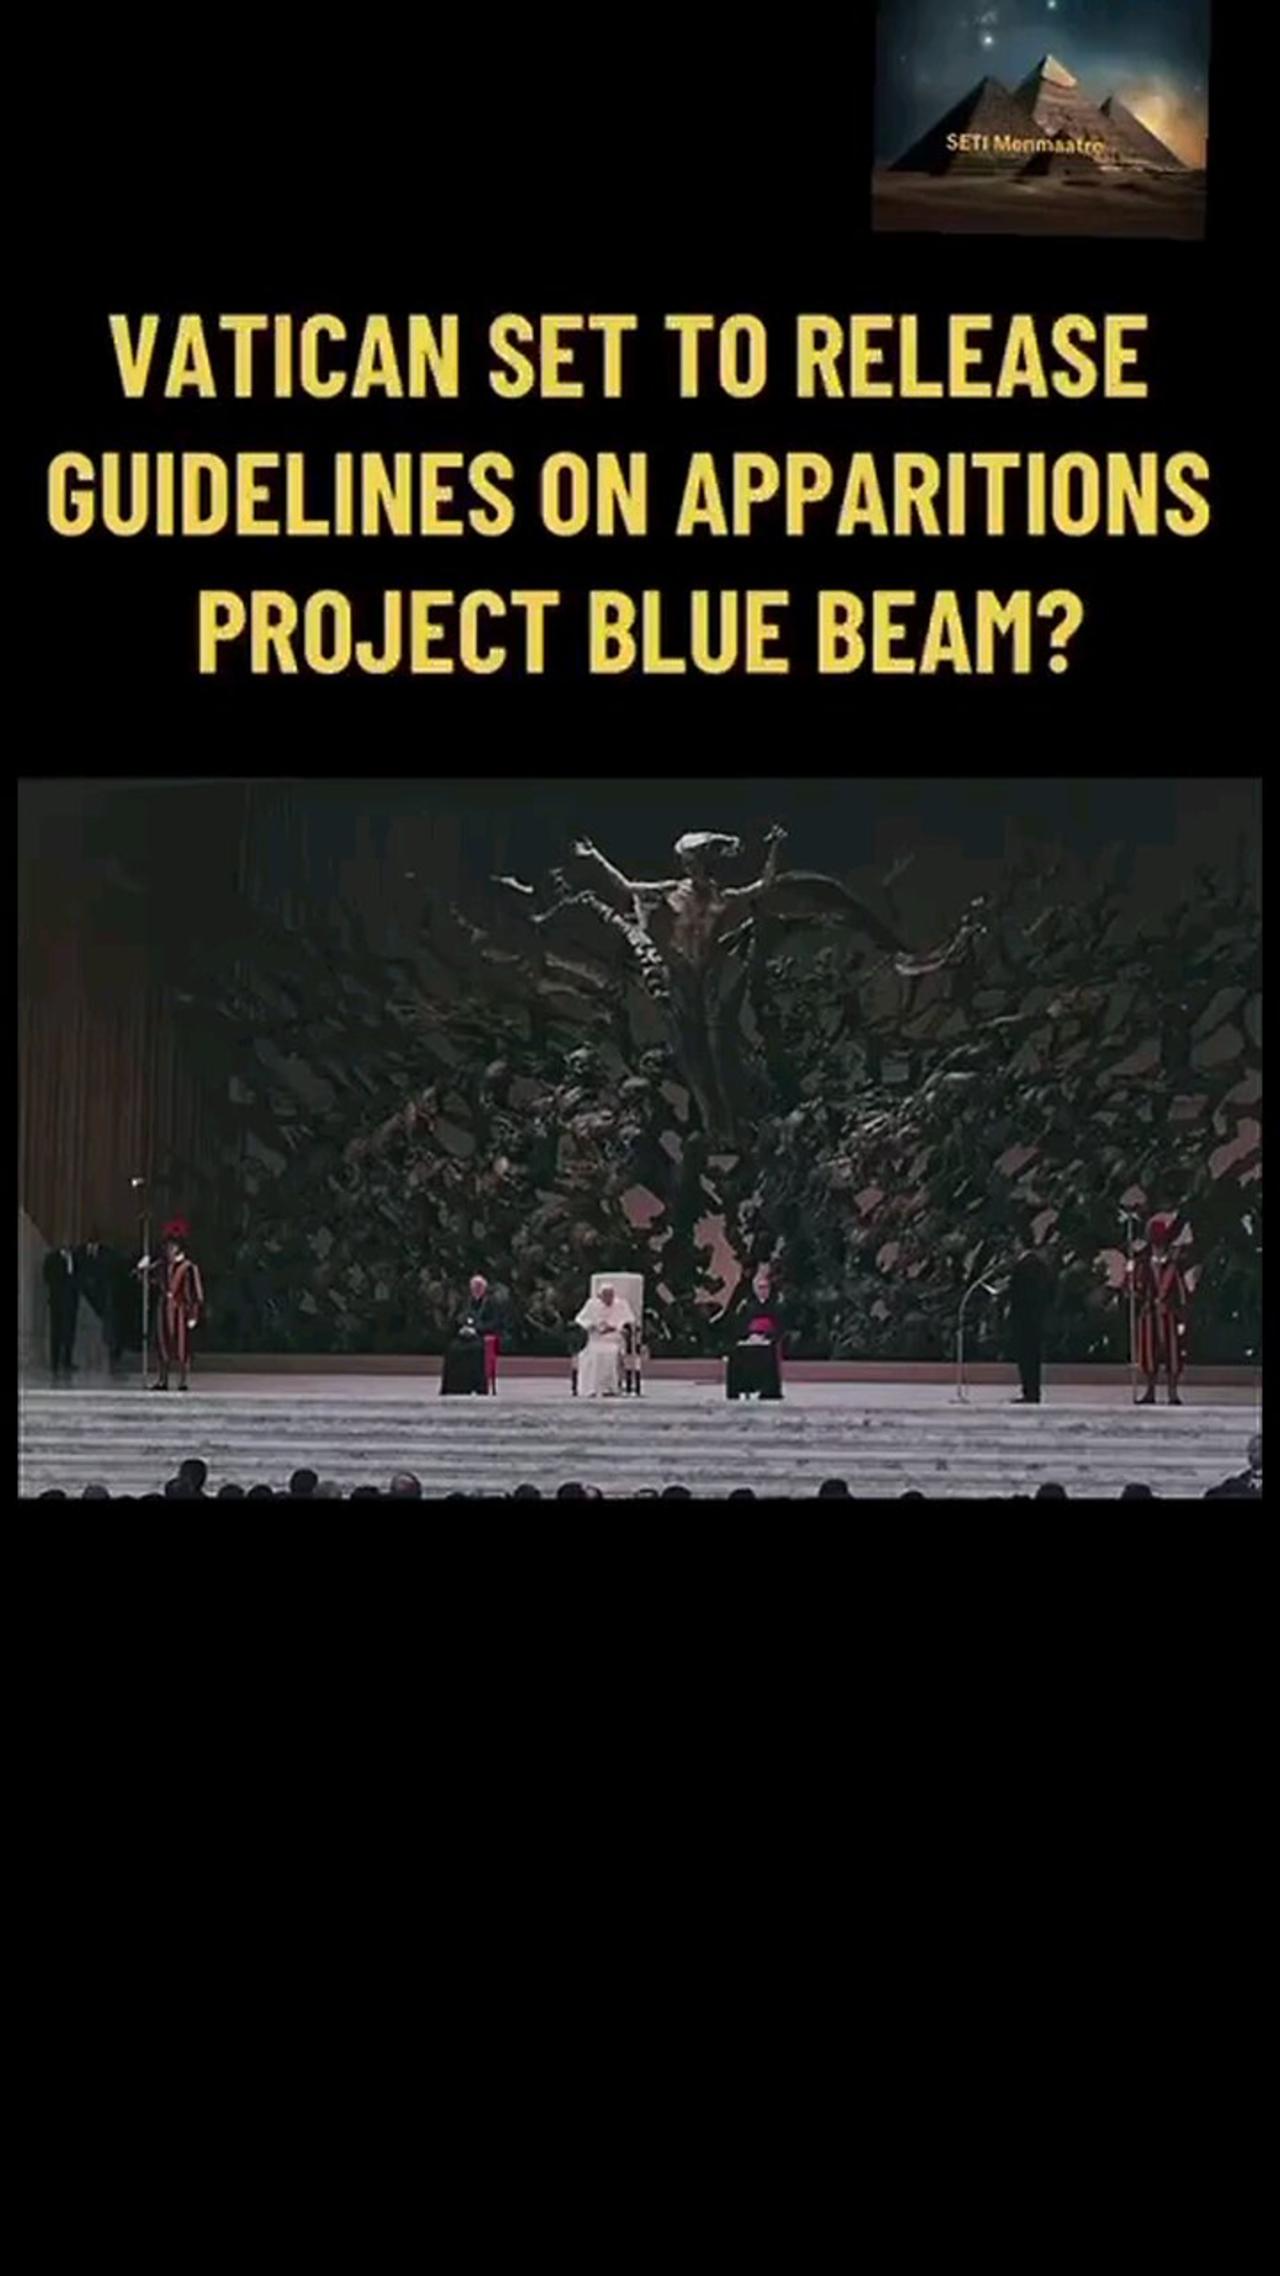 VATICAN SET TO RELEASE GUIDELINES ON APPARITIONS PROJECT BLUE BEAM  🍿🐸🇺🇸